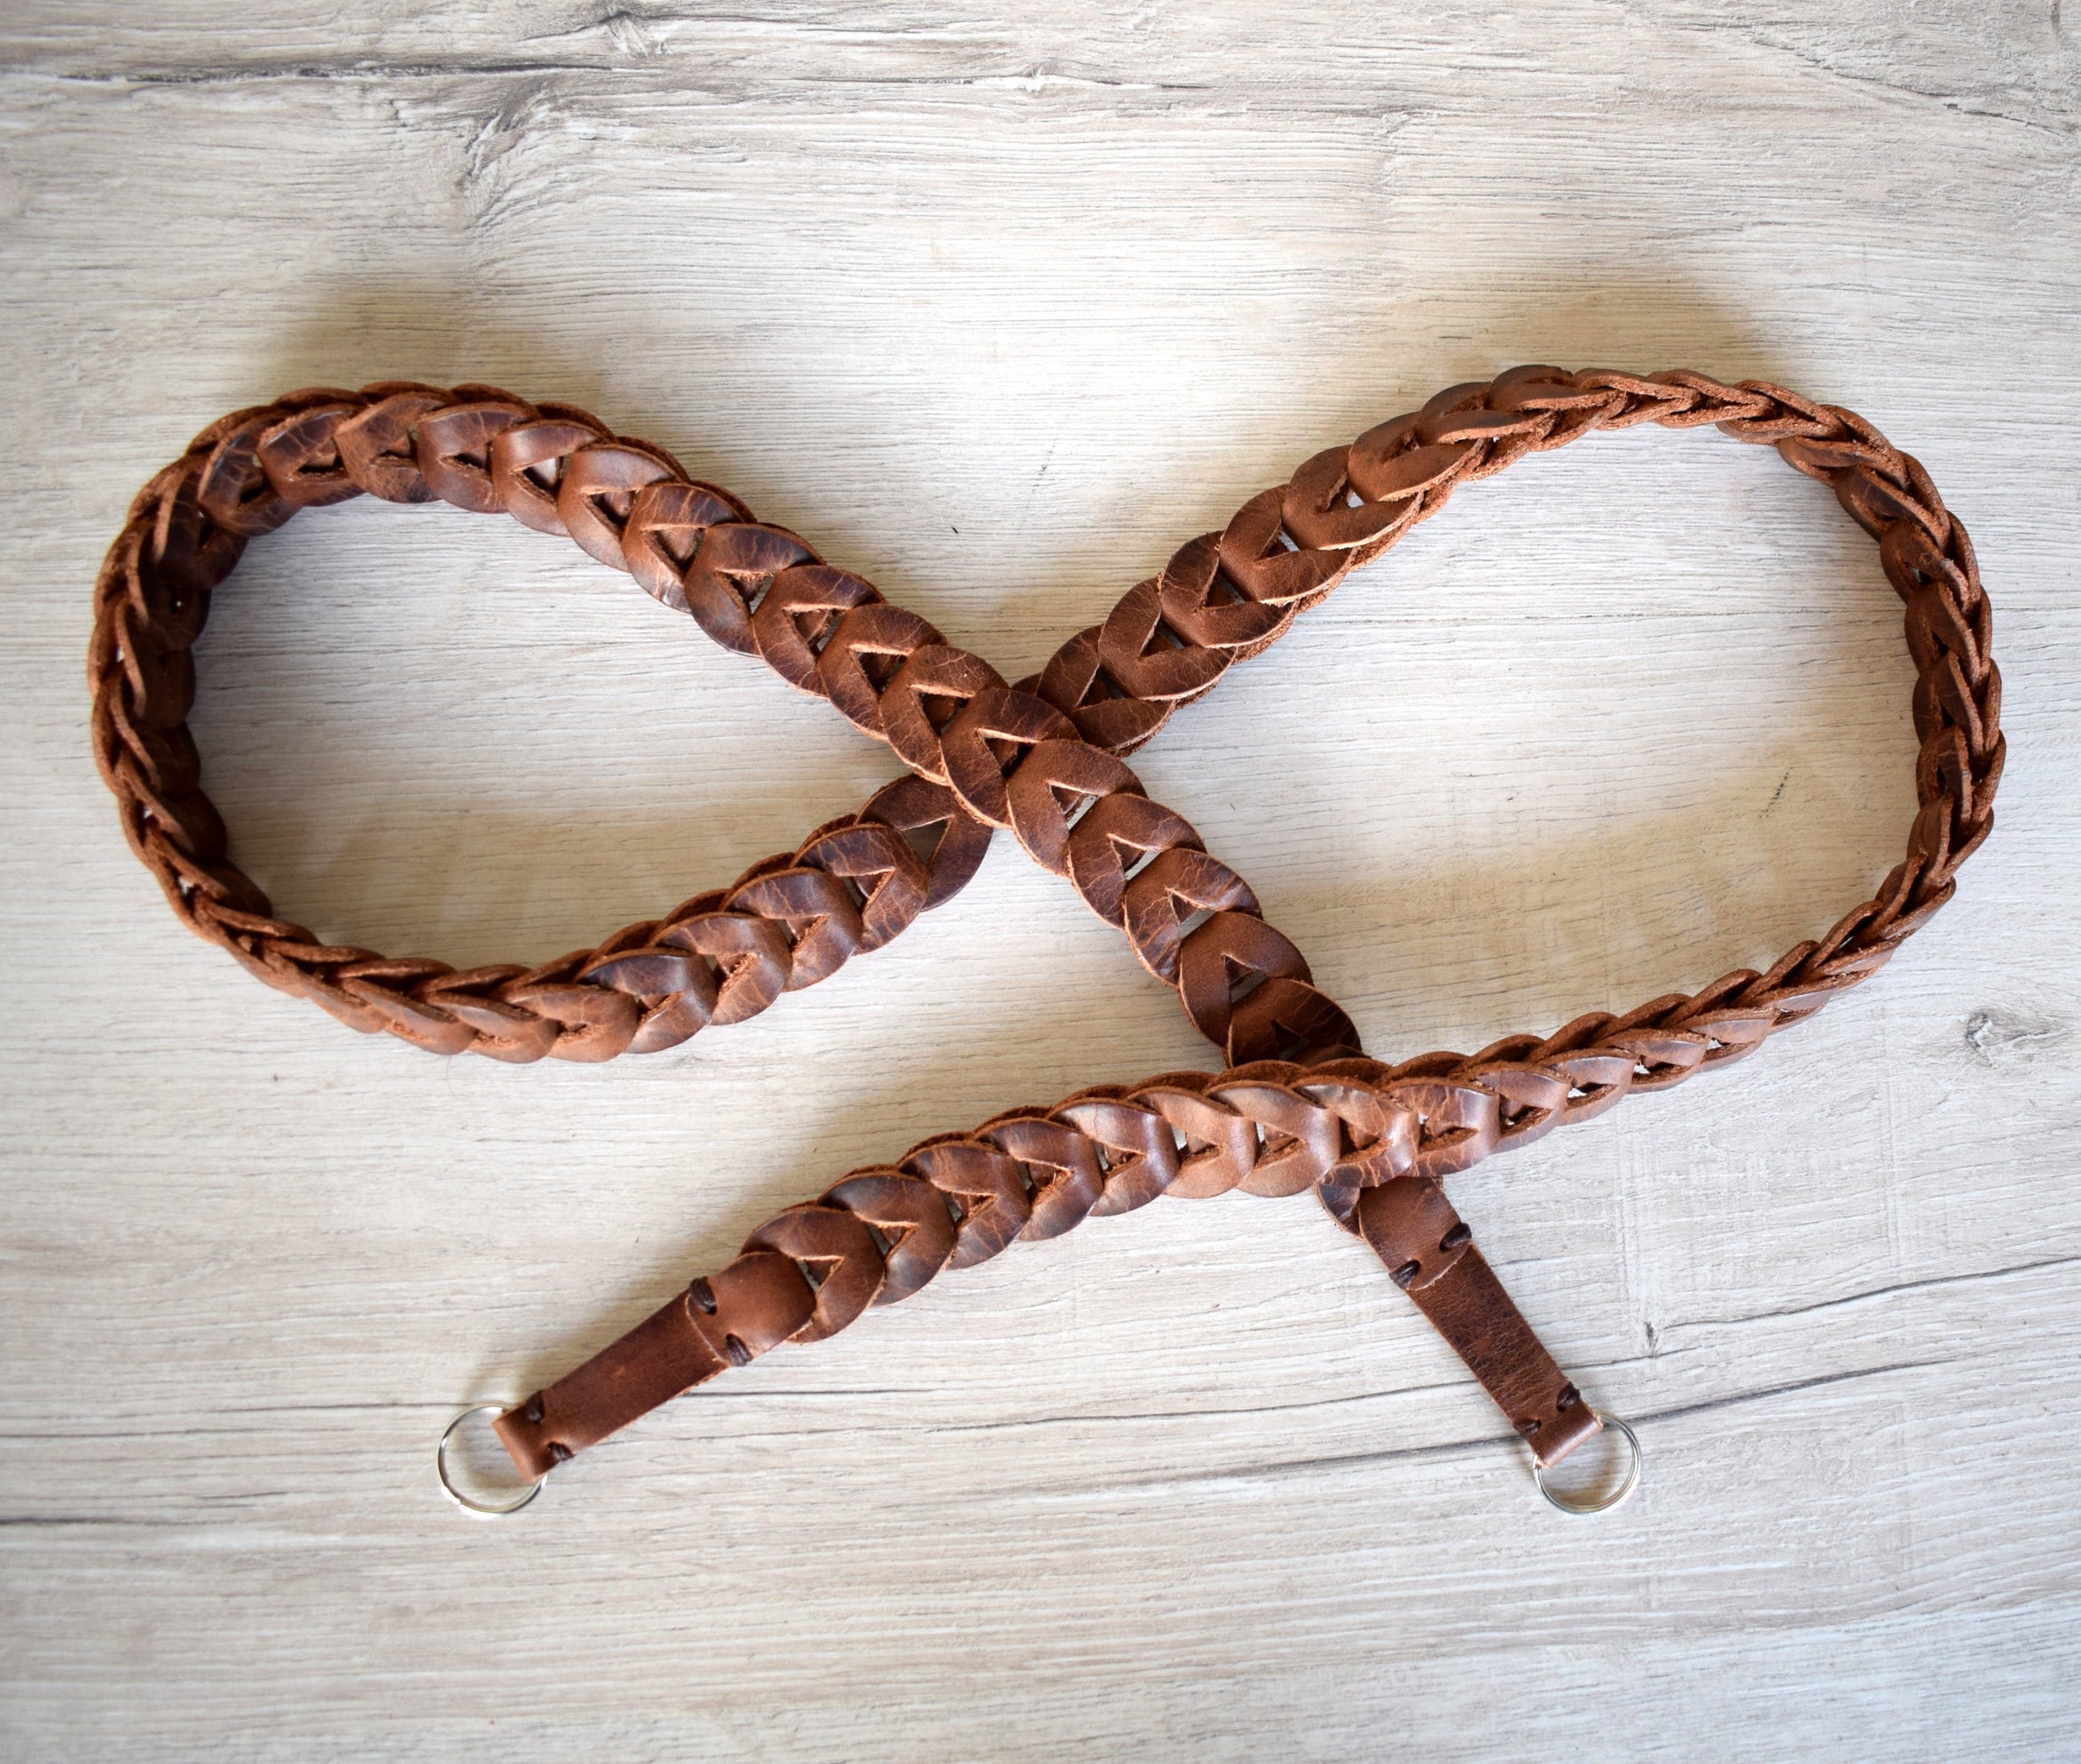 Camera Strap Made With Genuine Leather, Hand Braided and Stitch for the ...